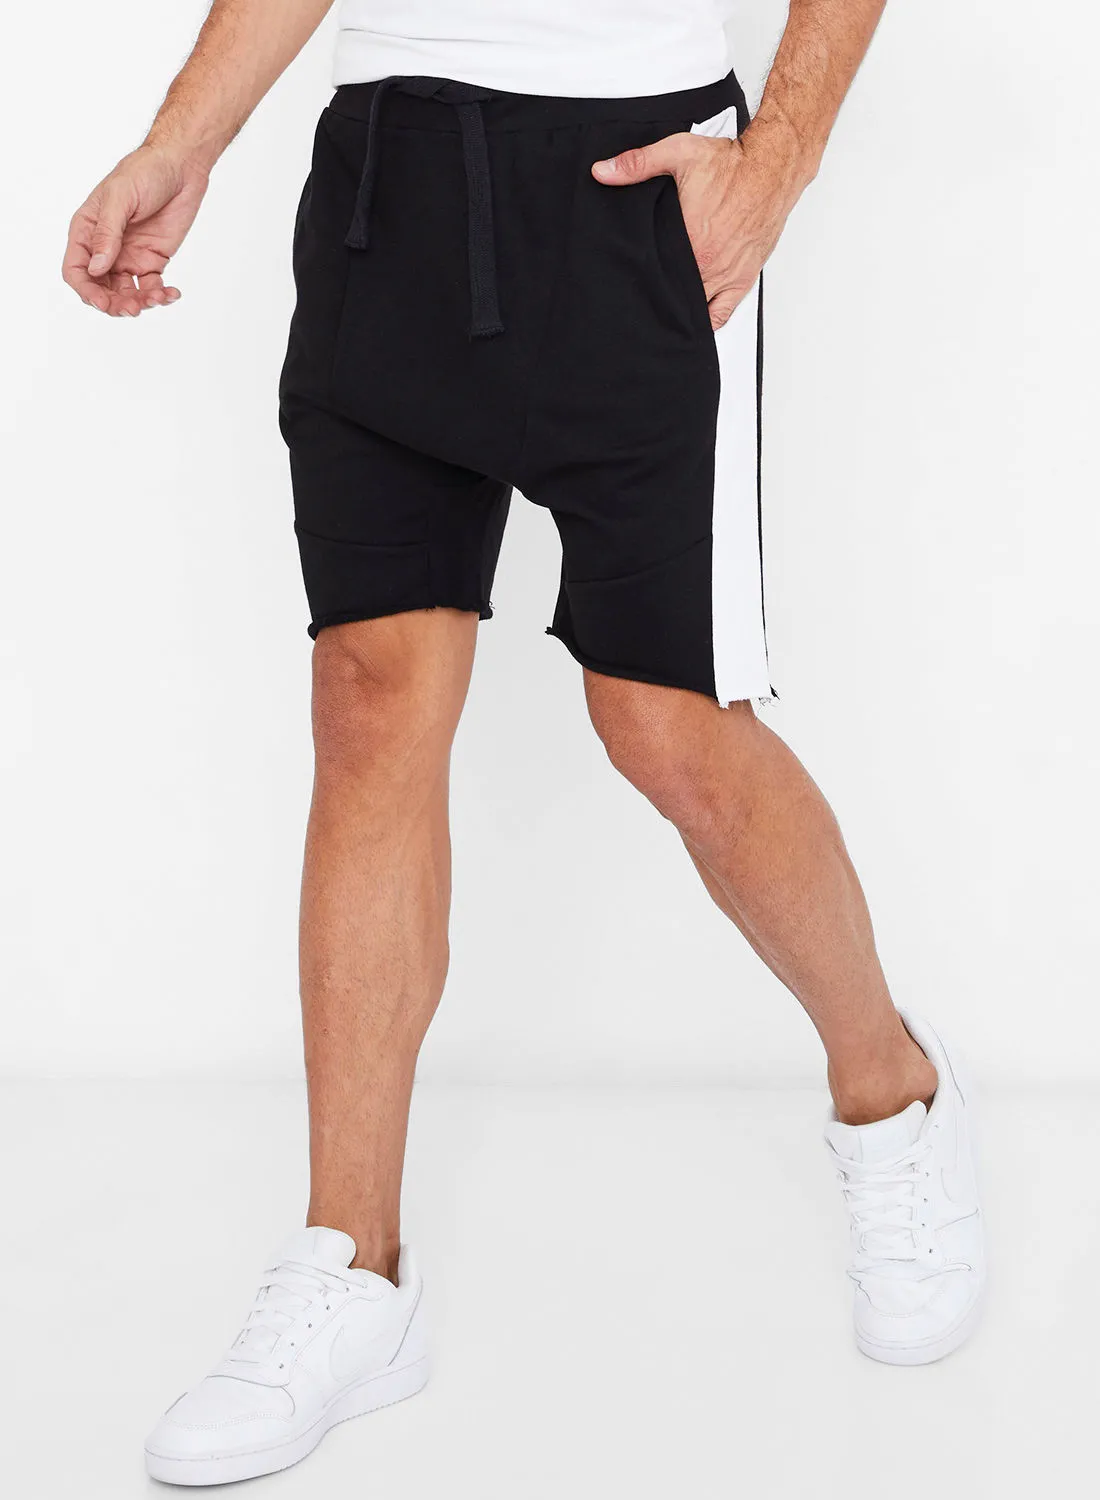 STATE 8 Side Panelled Knit Shorts Black/White